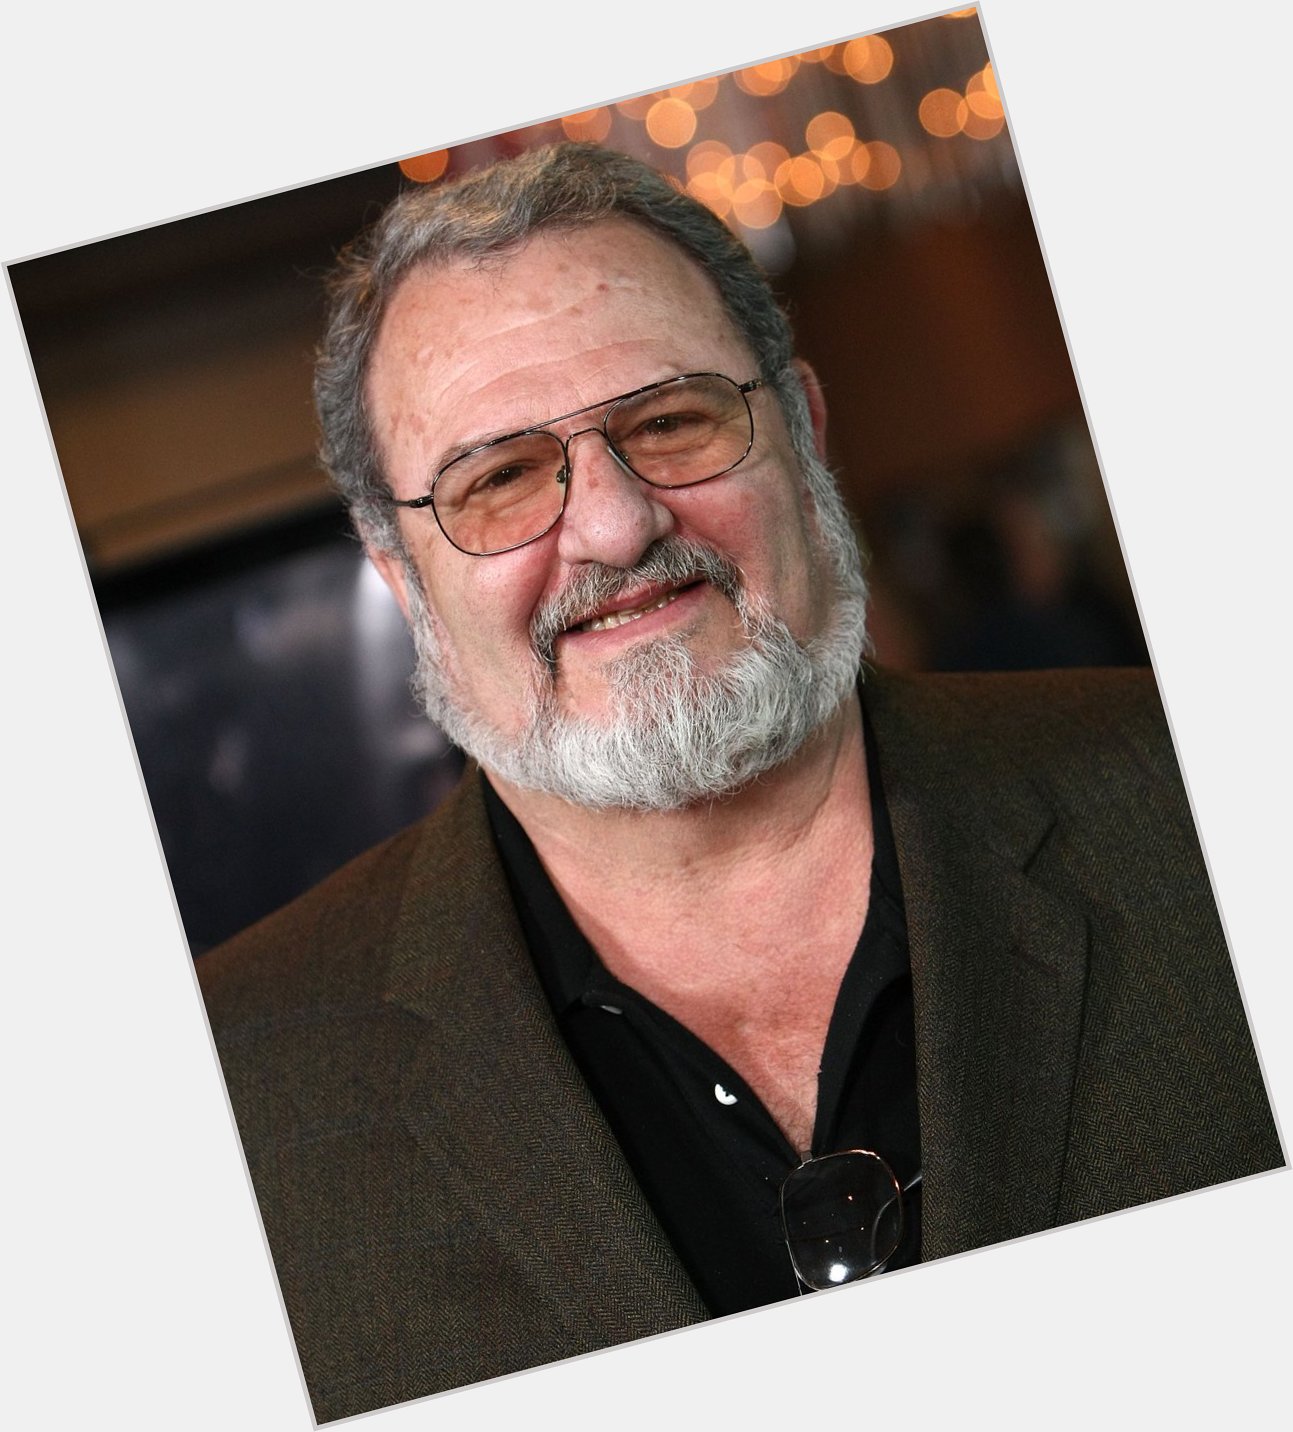 Happy belated birthday John Milius! Have another blessed year of life, General. 